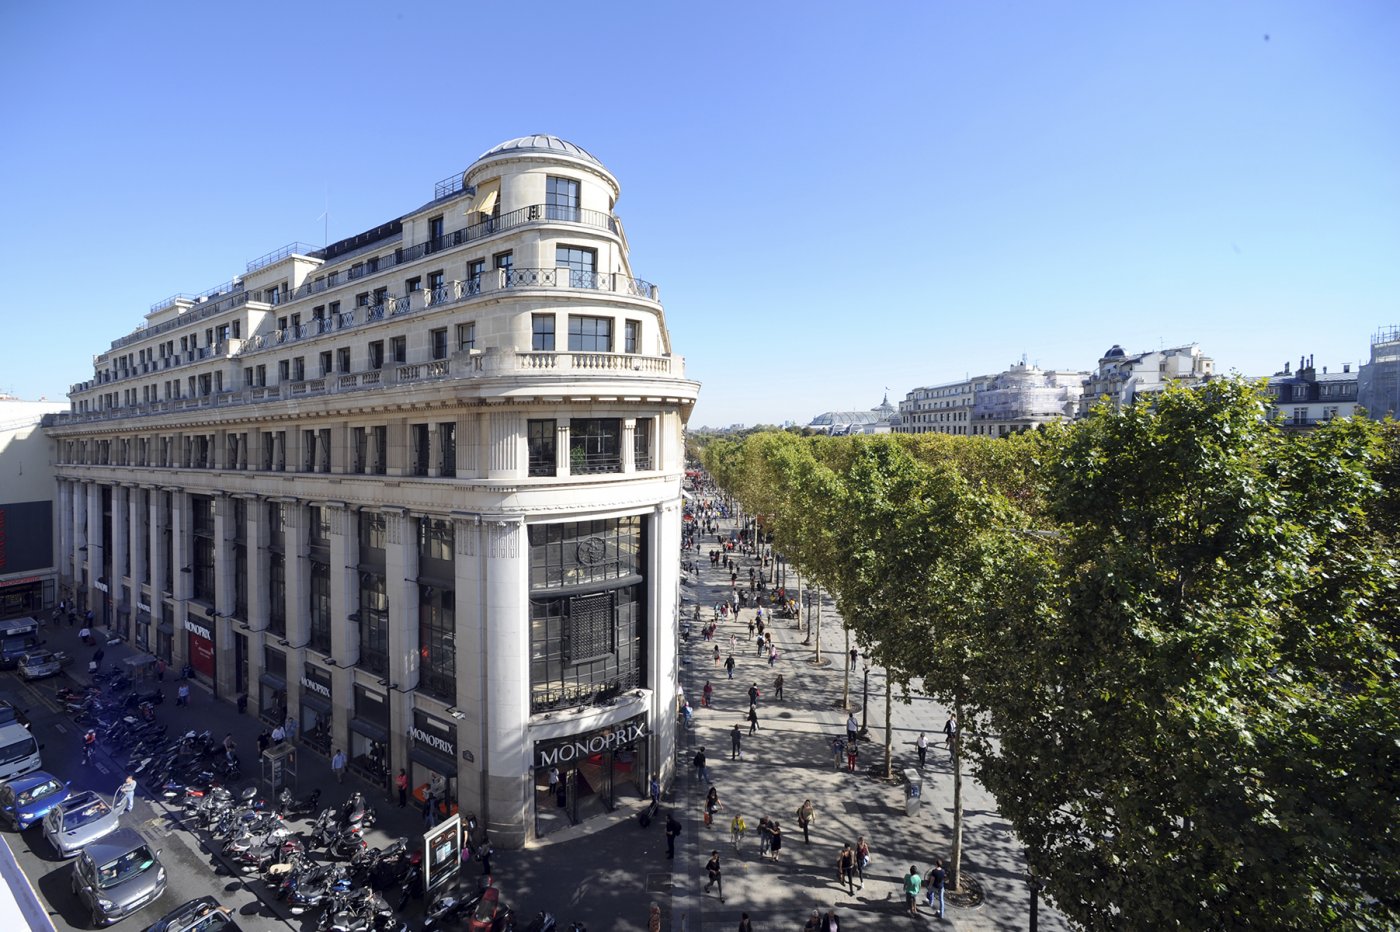 Galerie Lafayette Champs-Elysees – IN CORP Solutions